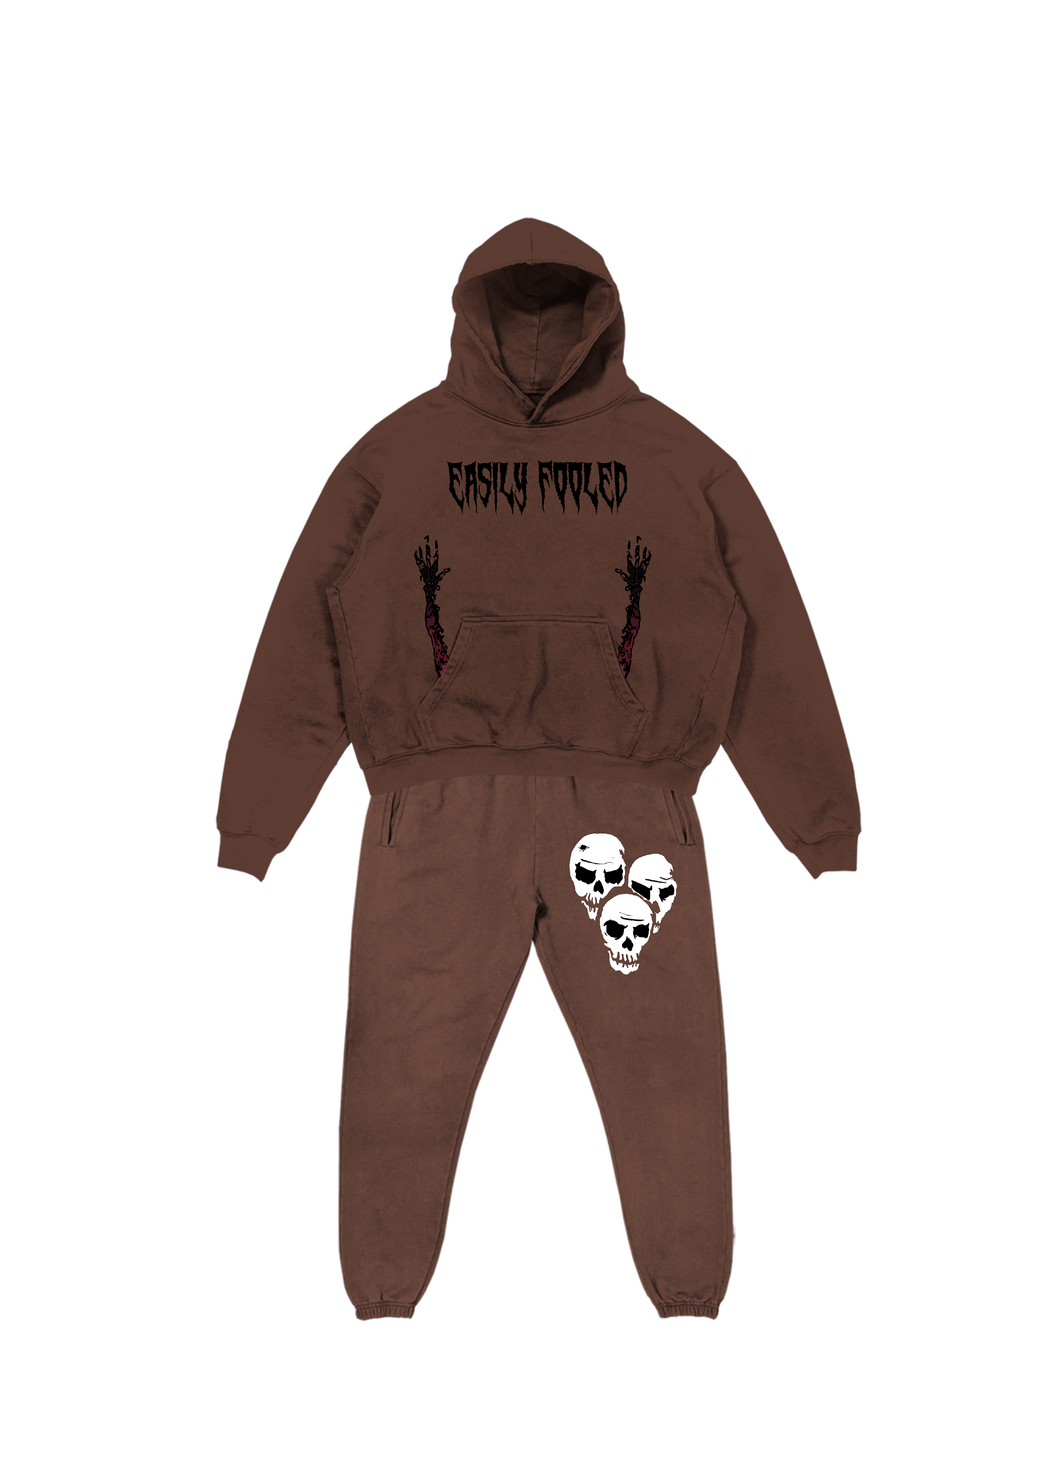 EASILY FOOLED AFTERLIFE SWEATSUIT